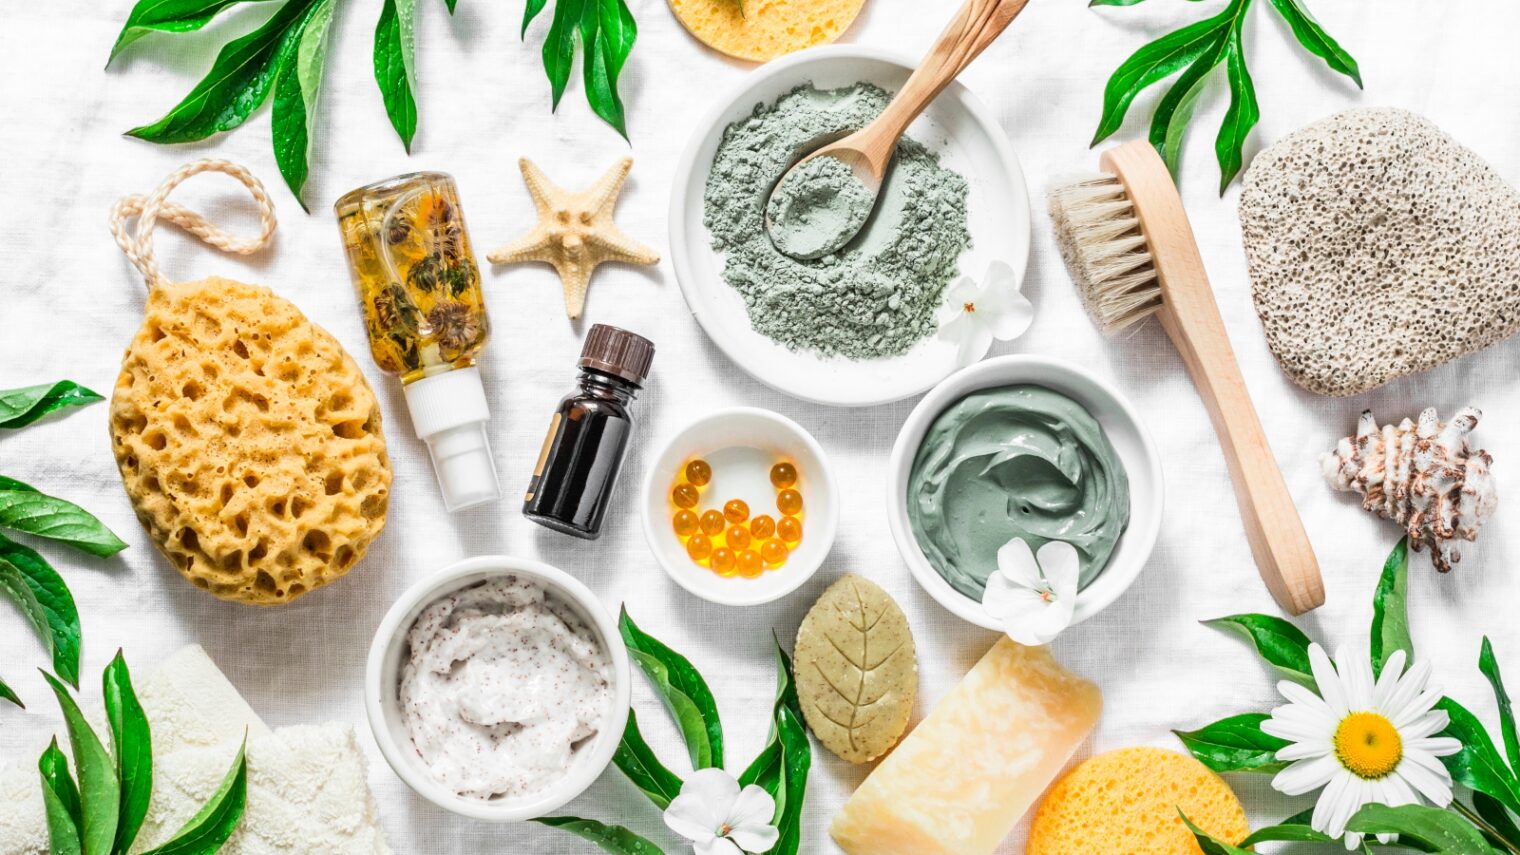 Natural skin and beauty products offer a refreshing alternative in a chemical-laden industry. Photo by Kiian Oksana via shutterstock.com